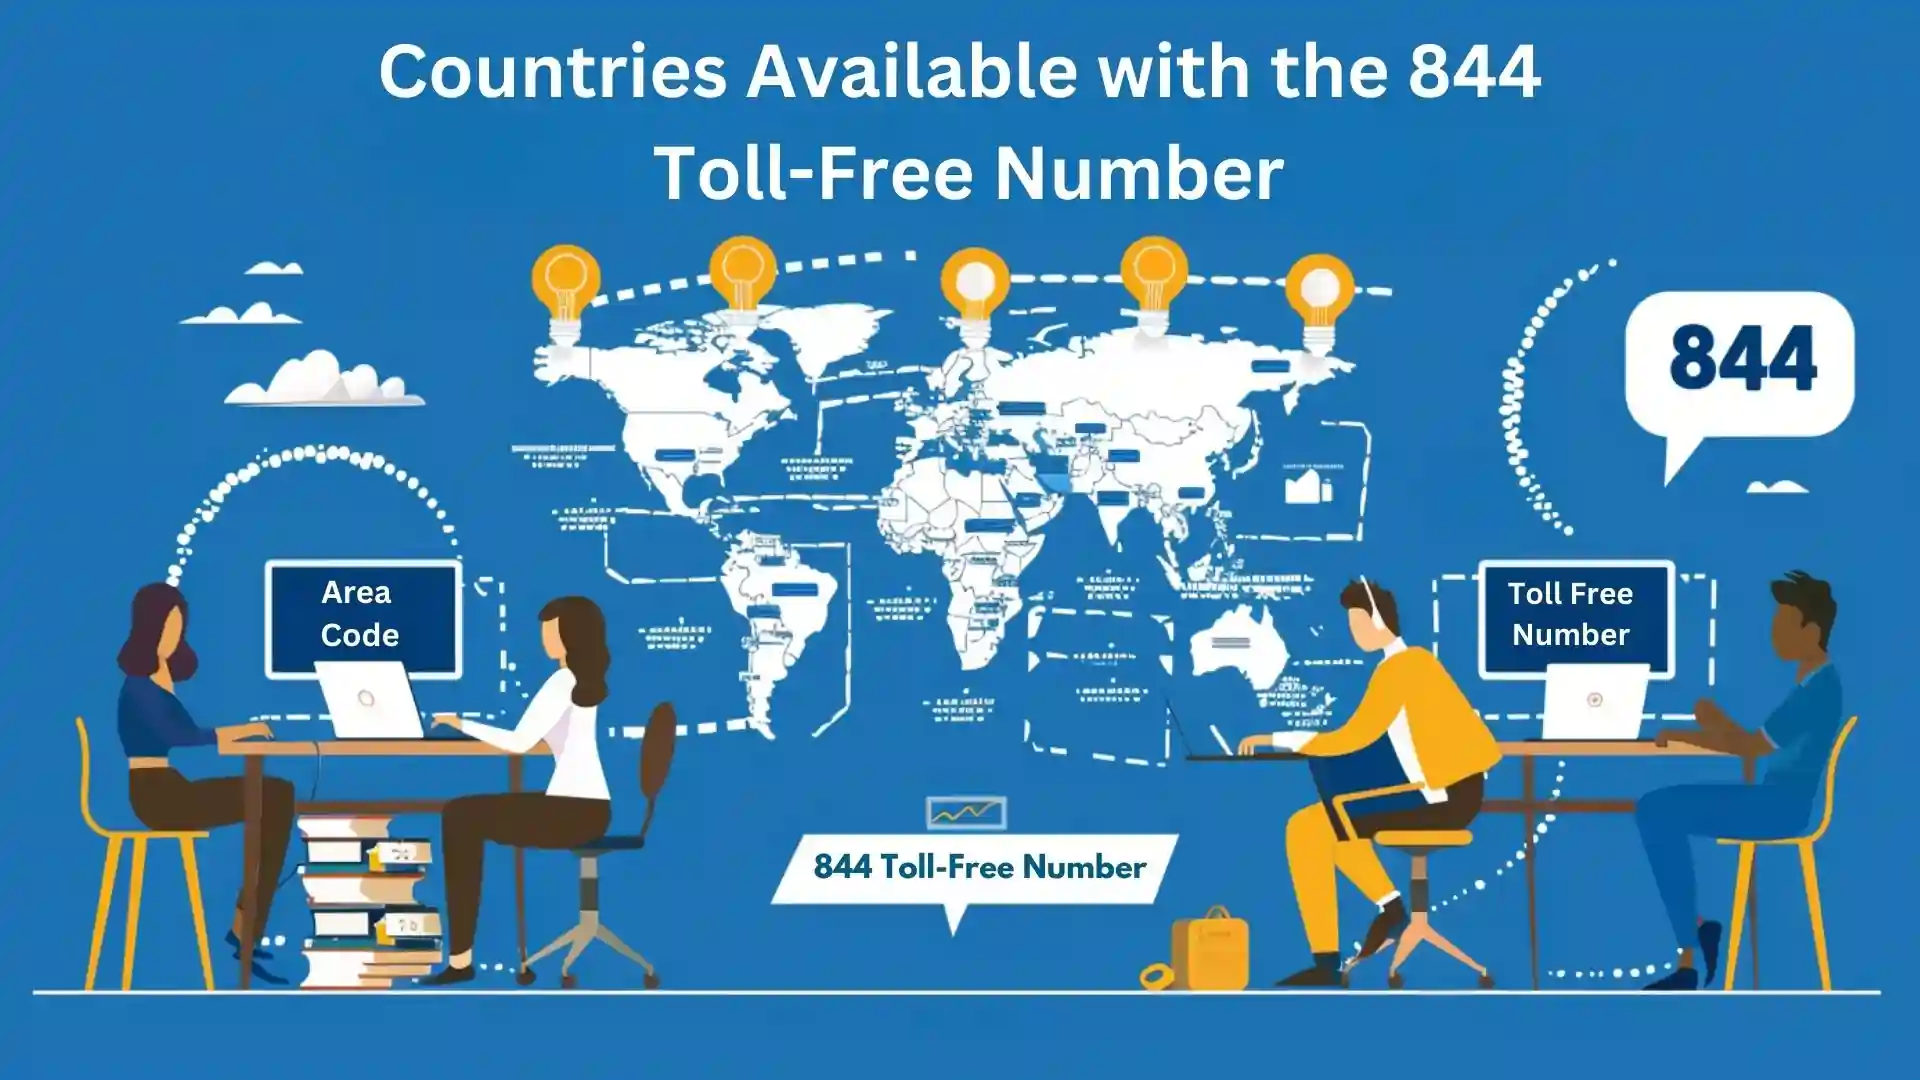 Countries Available with the 844 Toll-Free Number